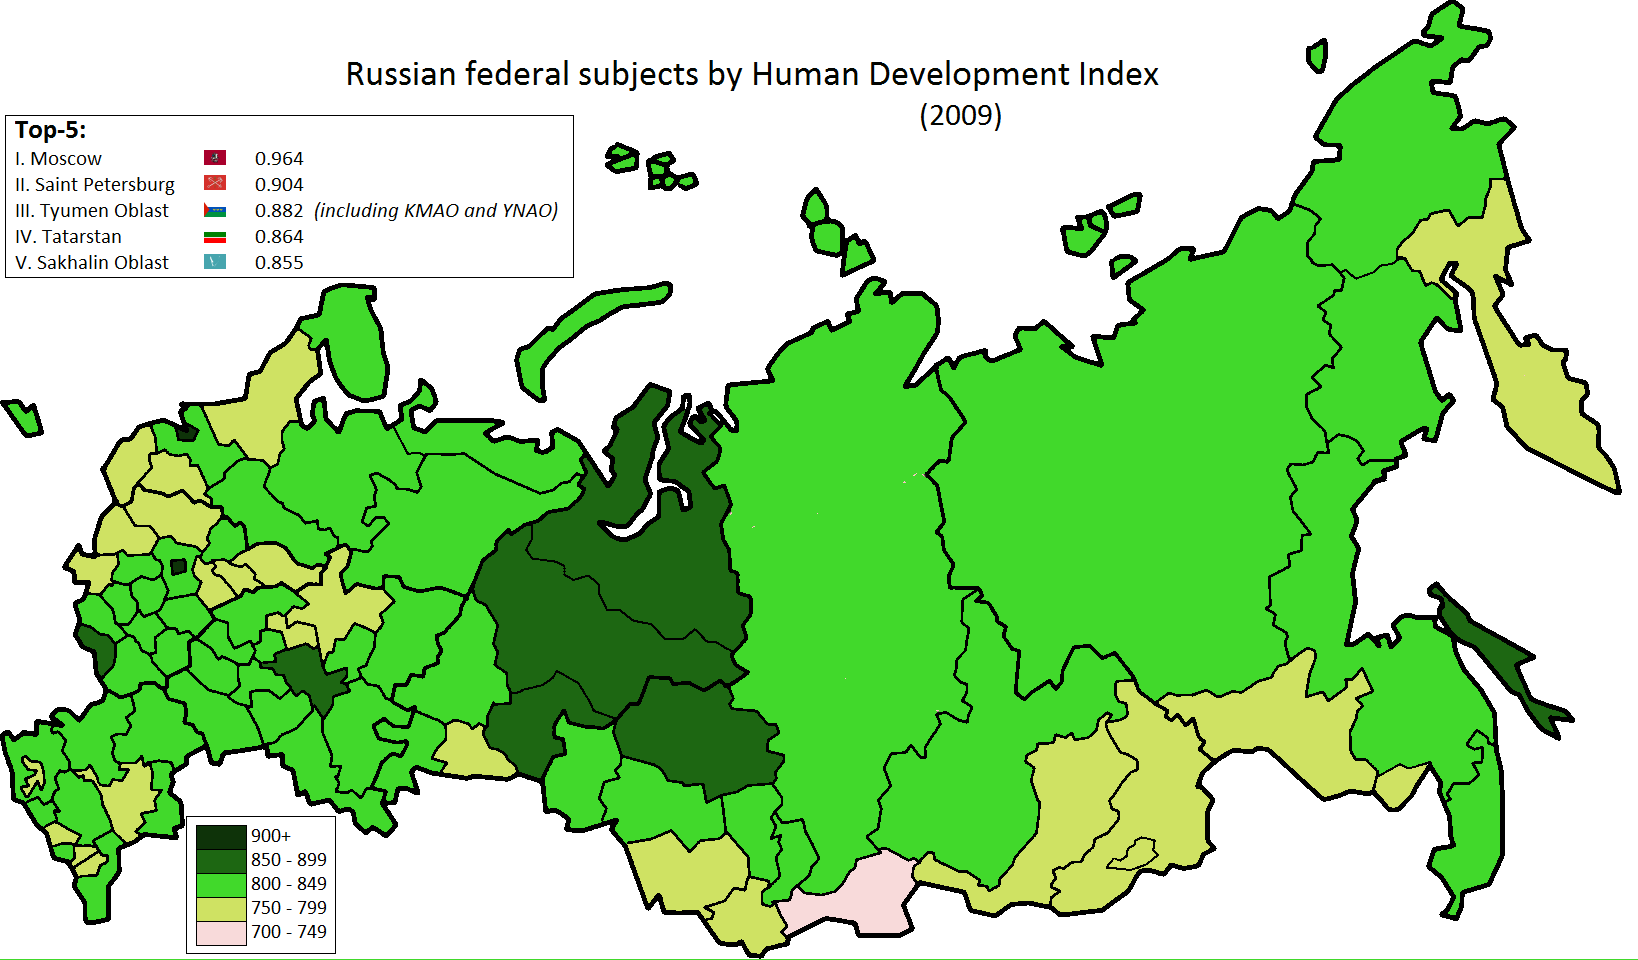 Subjects of russia. Federal subjects of Russia. Subjects of the Russian Federation. The Federal subjects of the Russian Federation. HDI Russia.